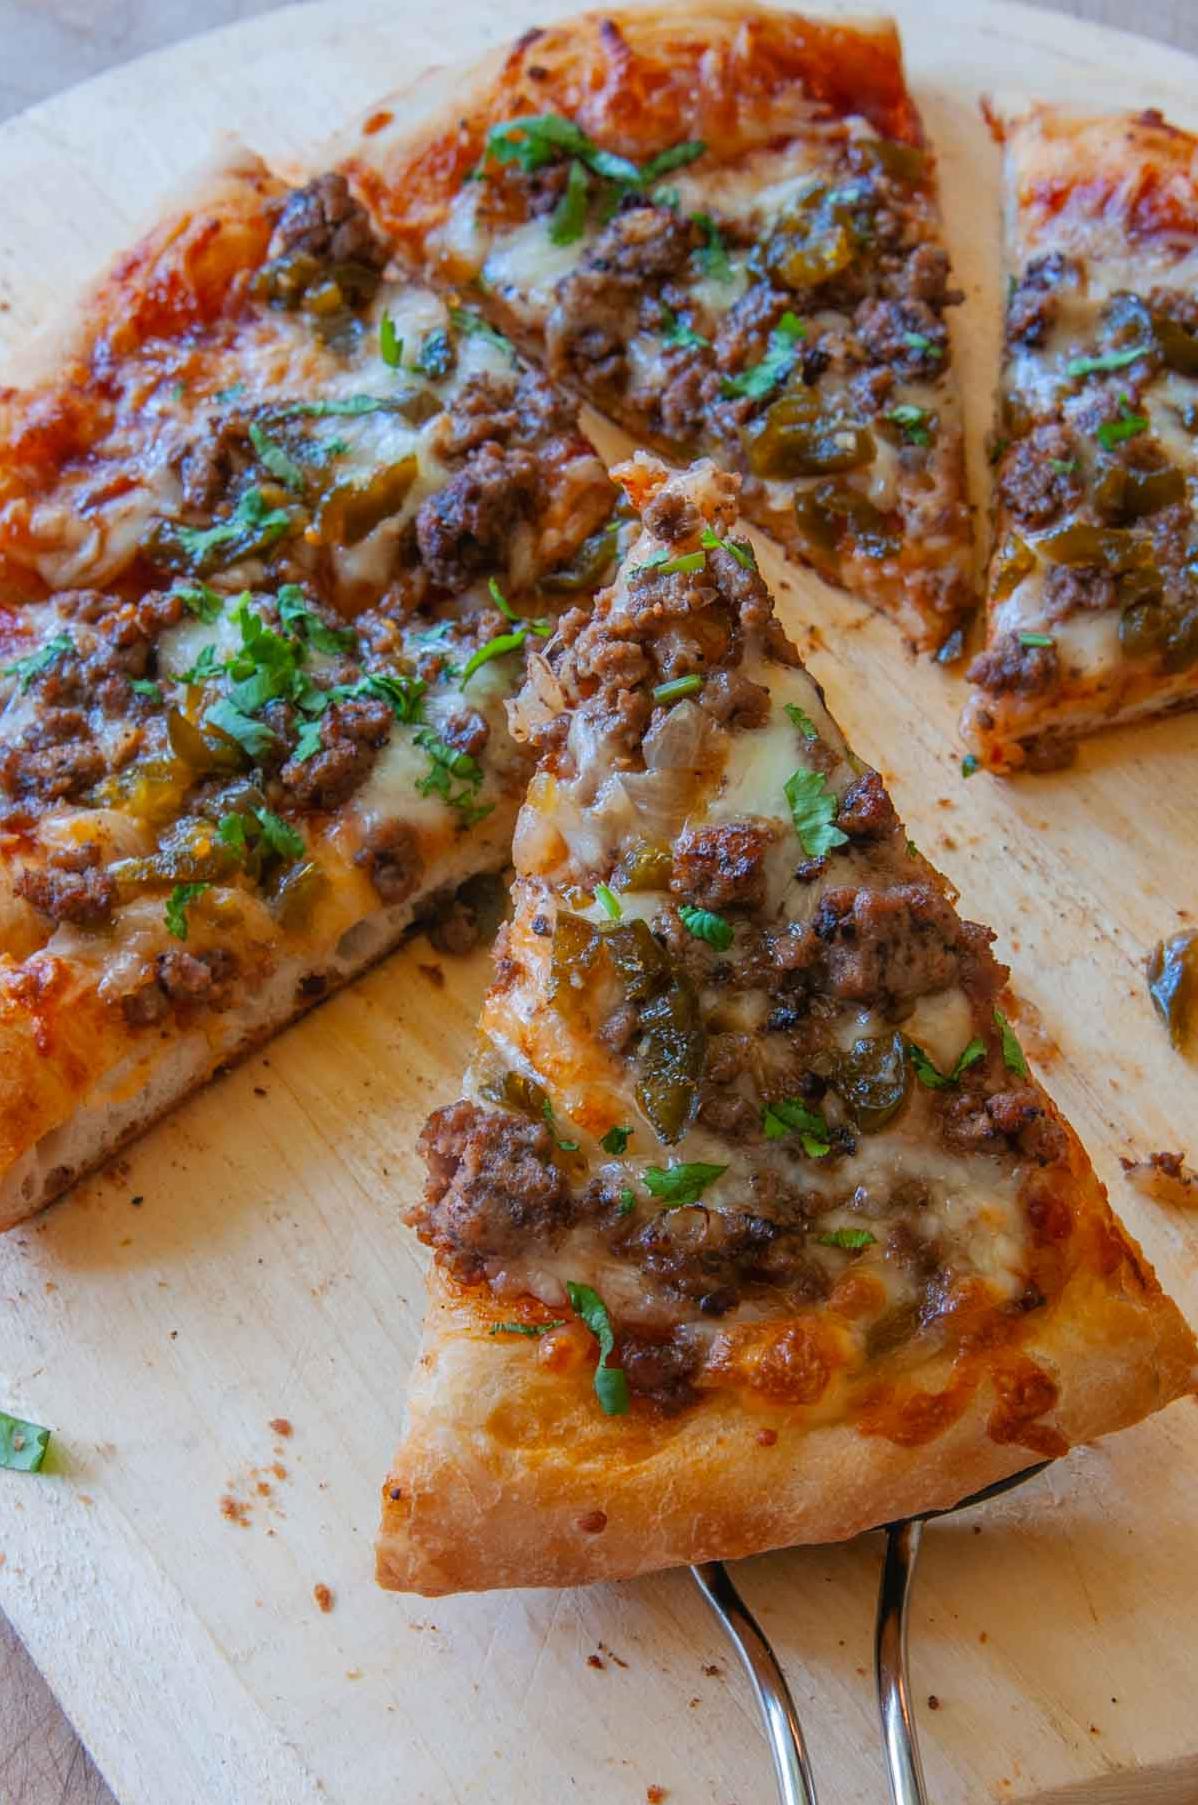  This bread machine pizza crust is a game changer!